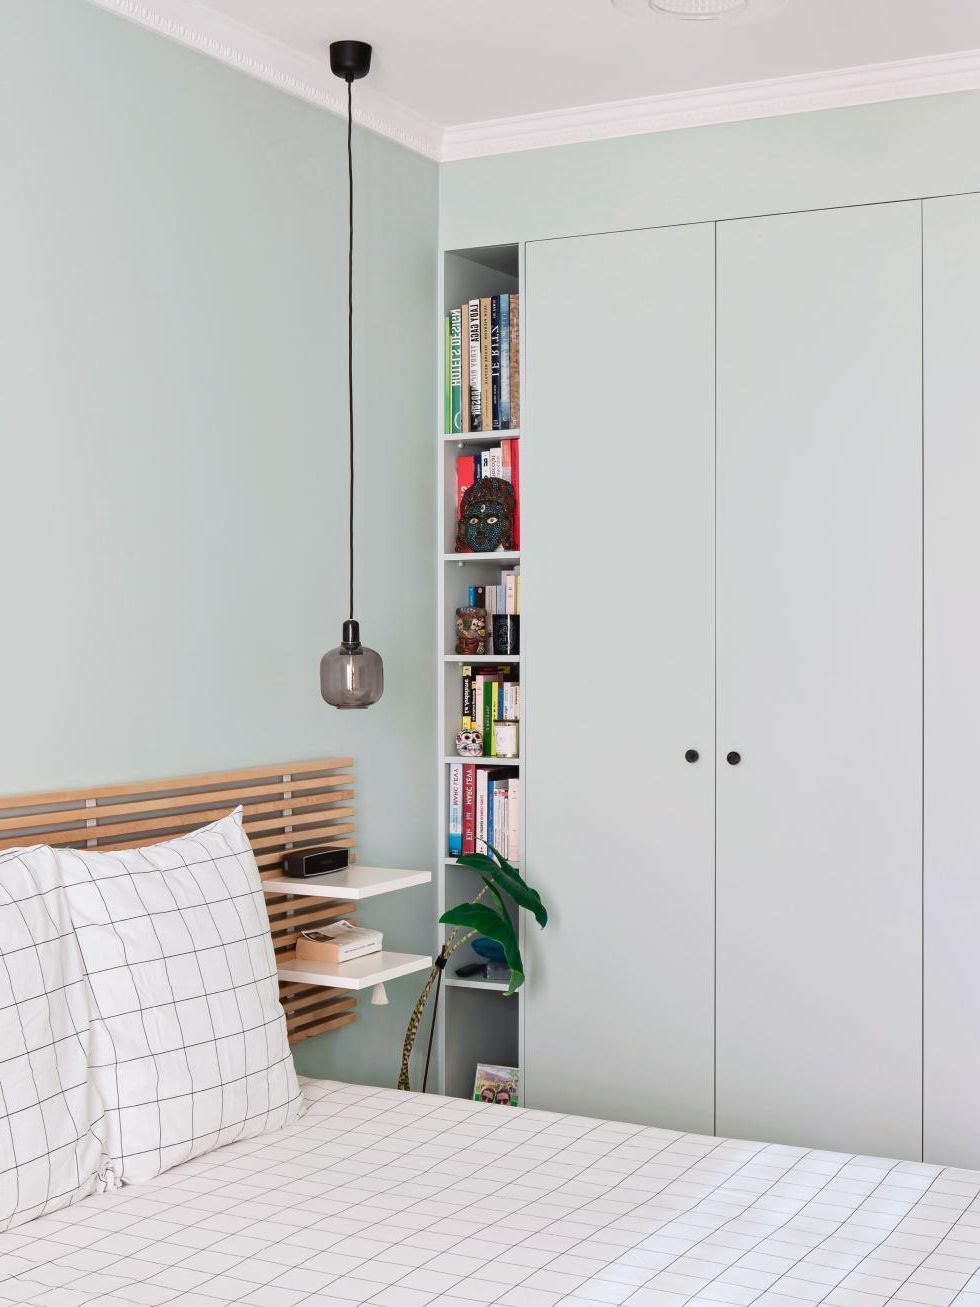 Where To Put Your Wardrobe? | Plum Throughout Where To  Wardrobes (Gallery 1 of 20)